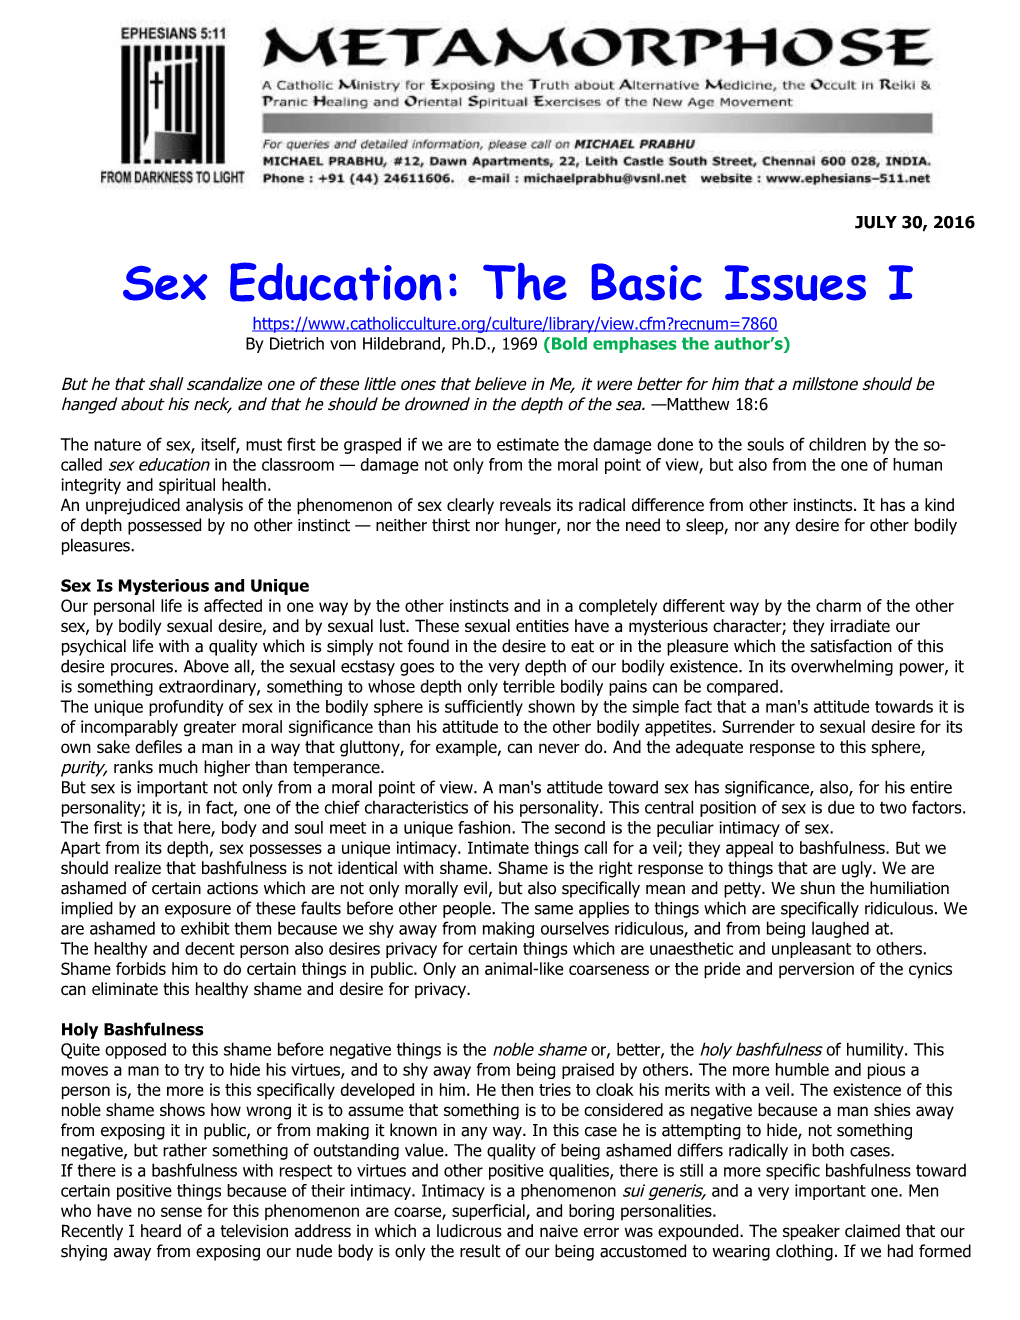 Sex Education: the Basic Issues I